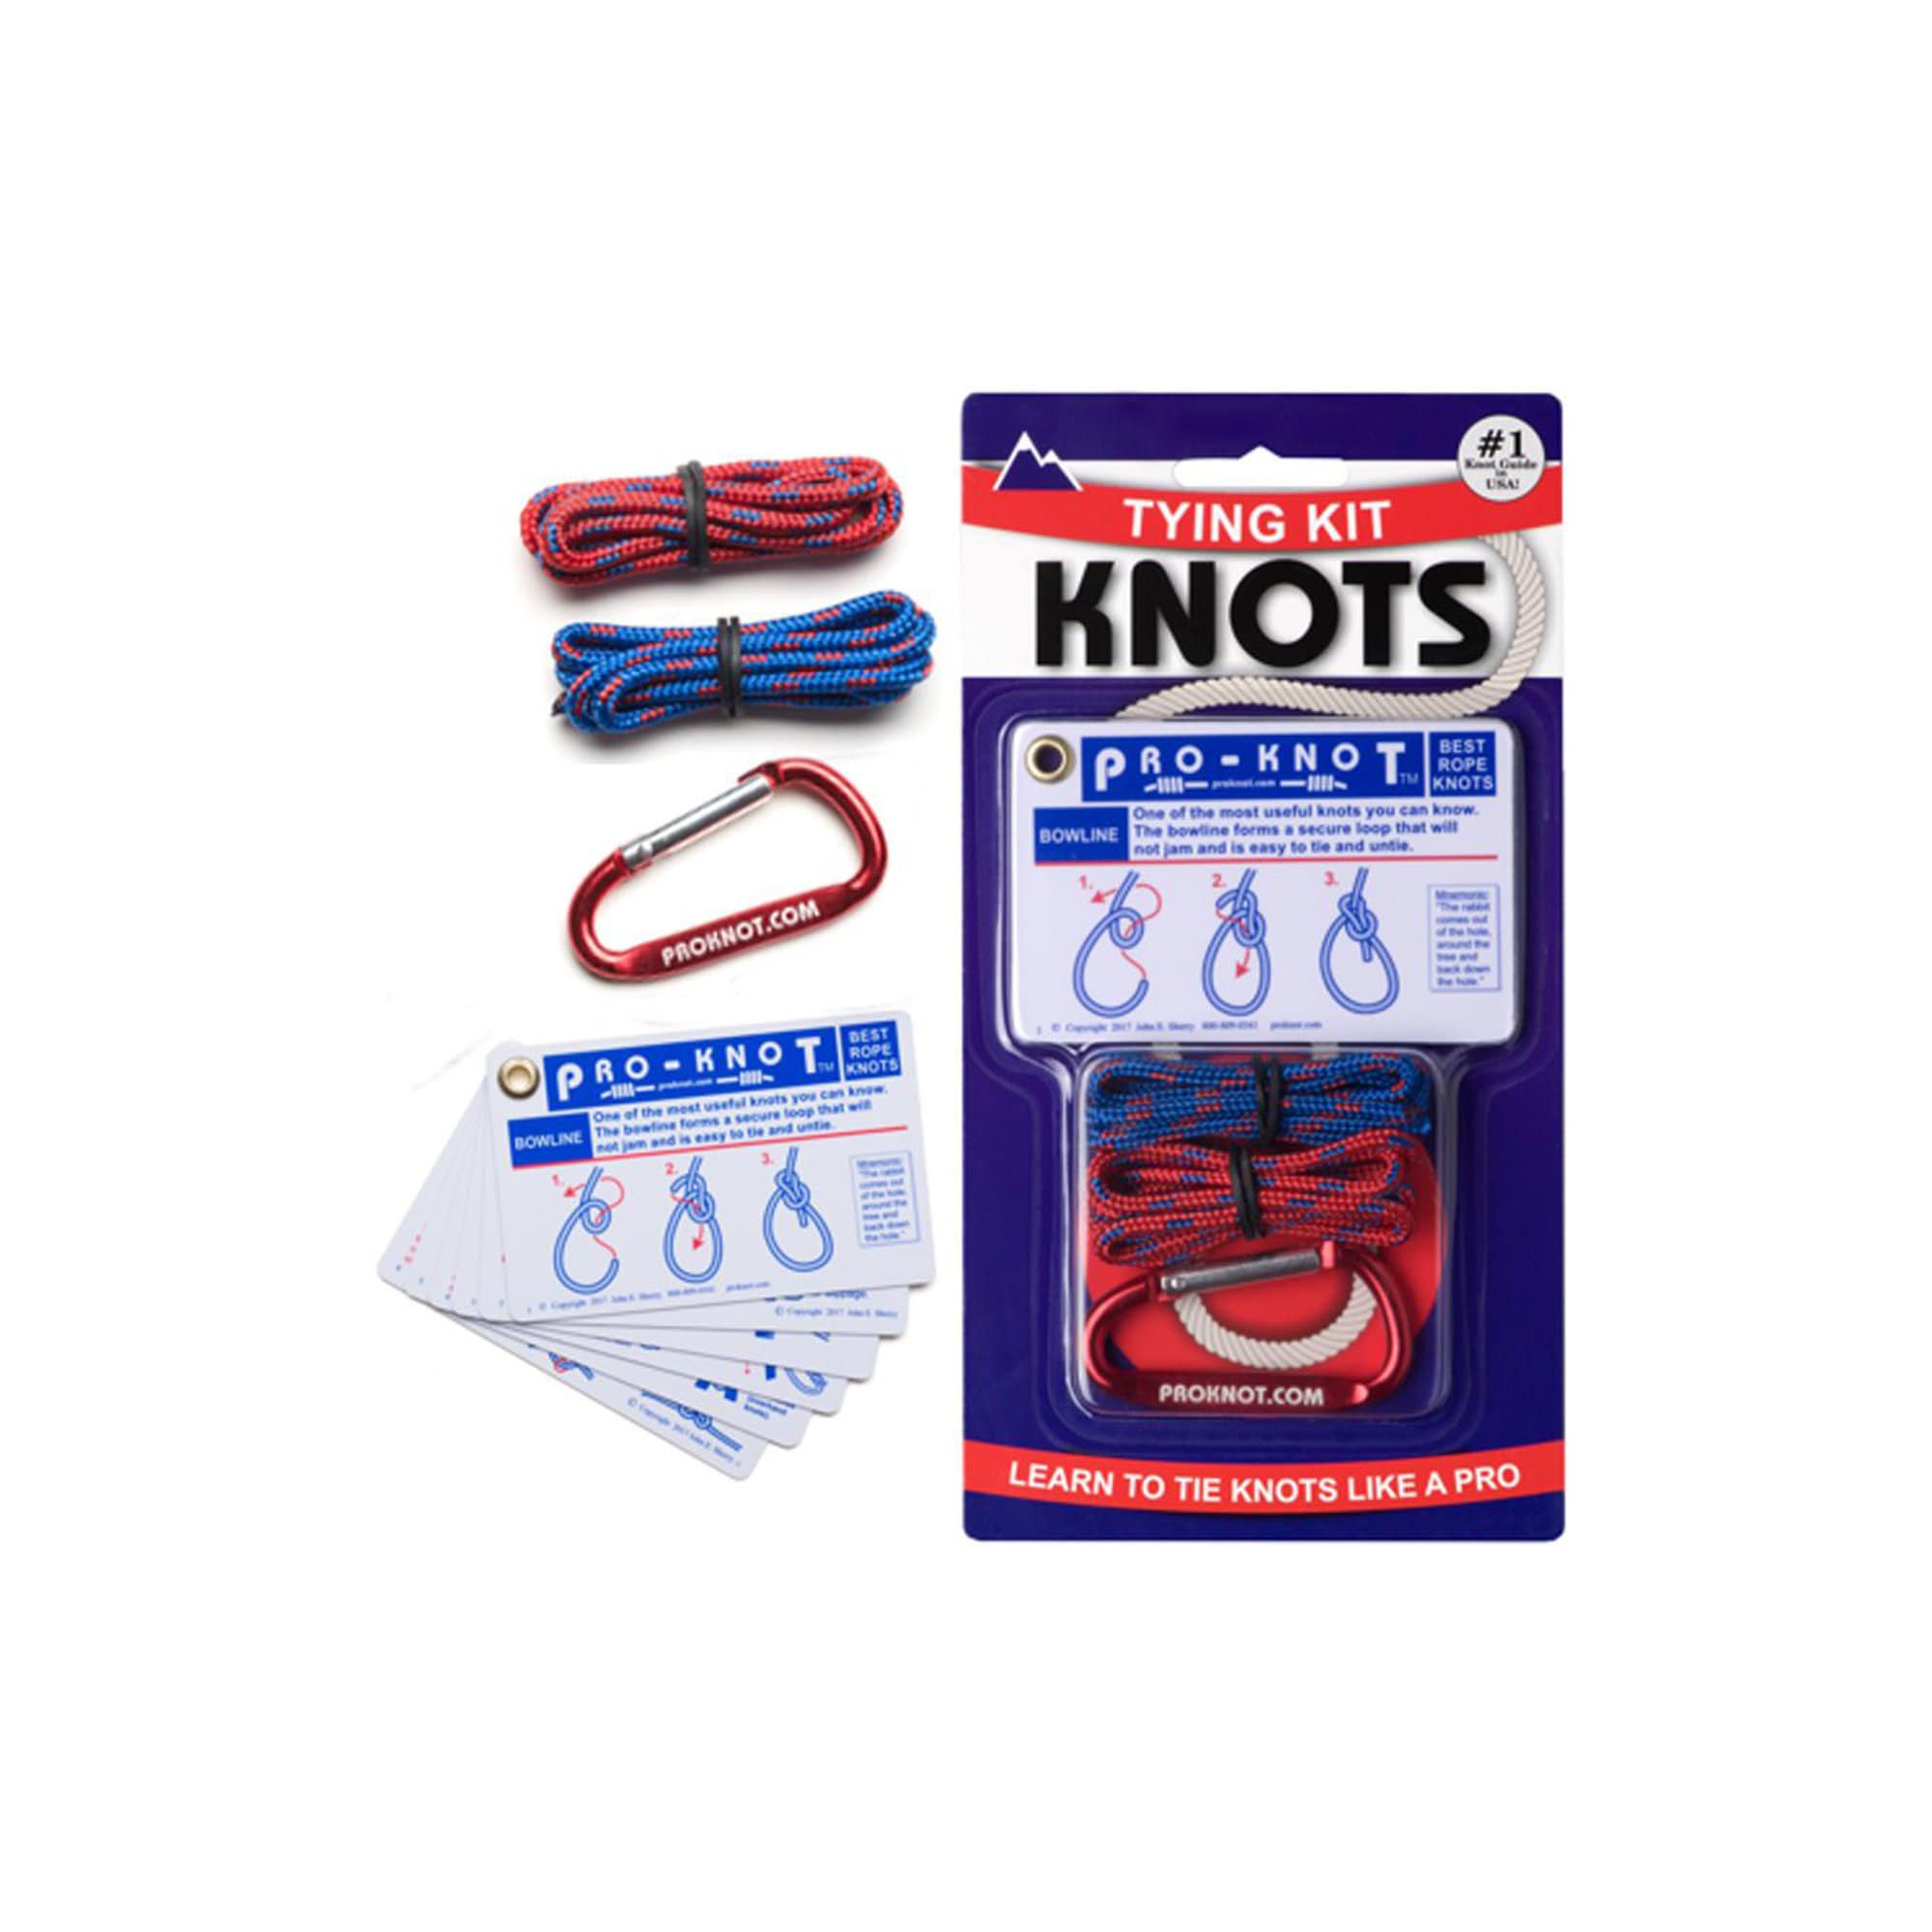 Pro-Knot Fly Fishing Knot Cards - Waterproof Knot Cards With 12 Best Fly Fishing  Knots, Easy To Follow Knot Tying Instructions